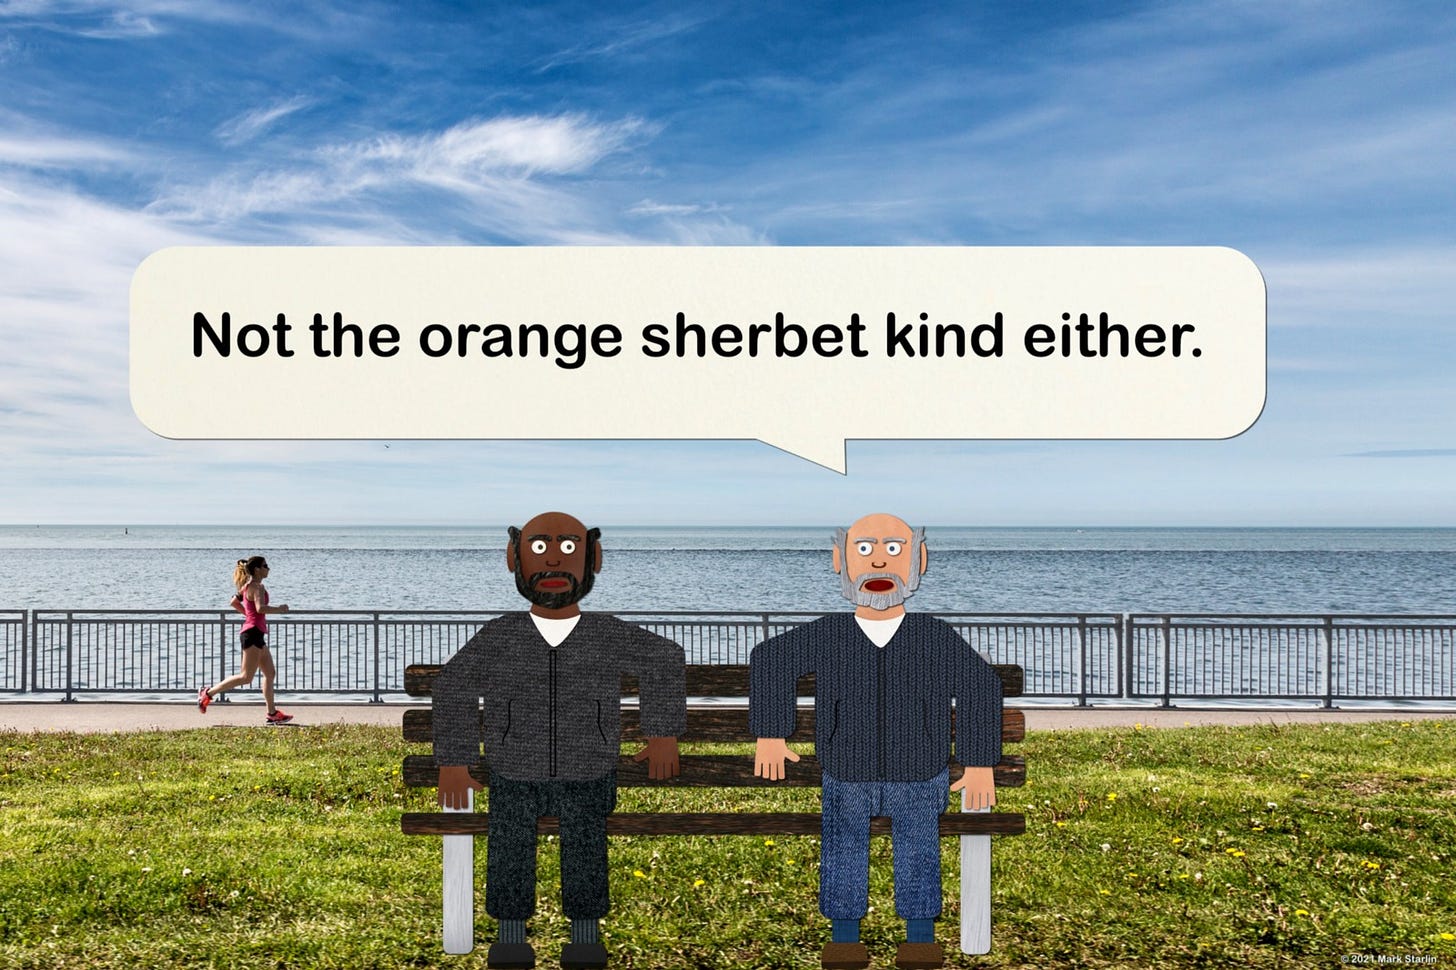 Man says, “Not the orange sherbet kind either.”